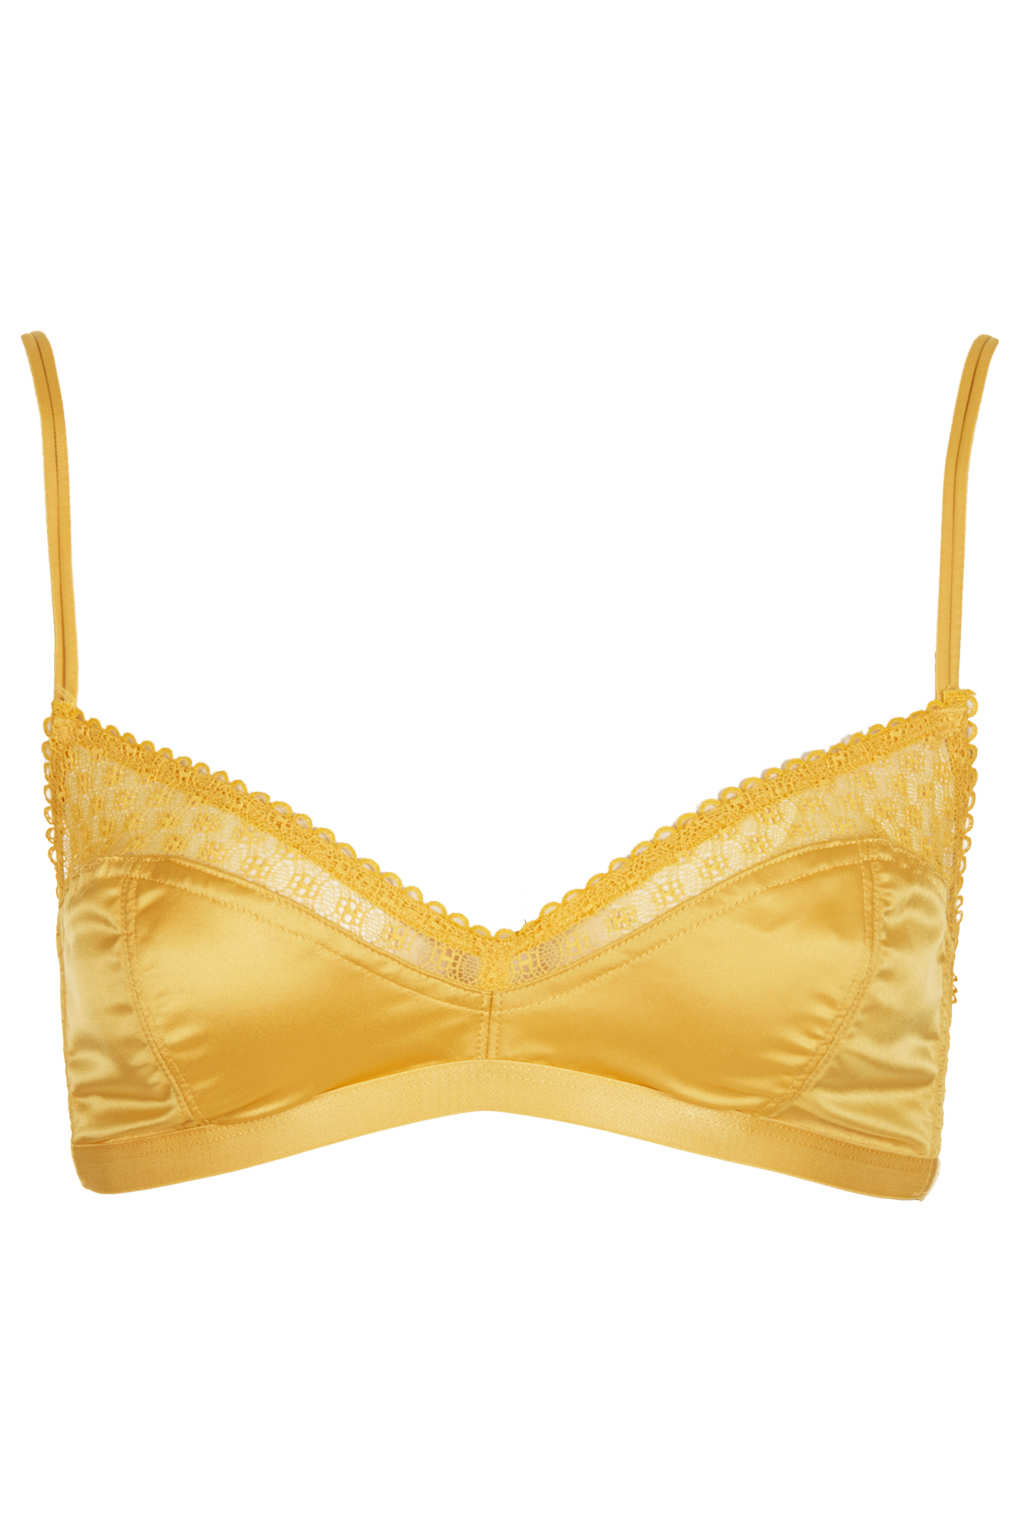 TOPSHOP Satin and Lace Soft Bra in Mustard (Yellow) - Lyst